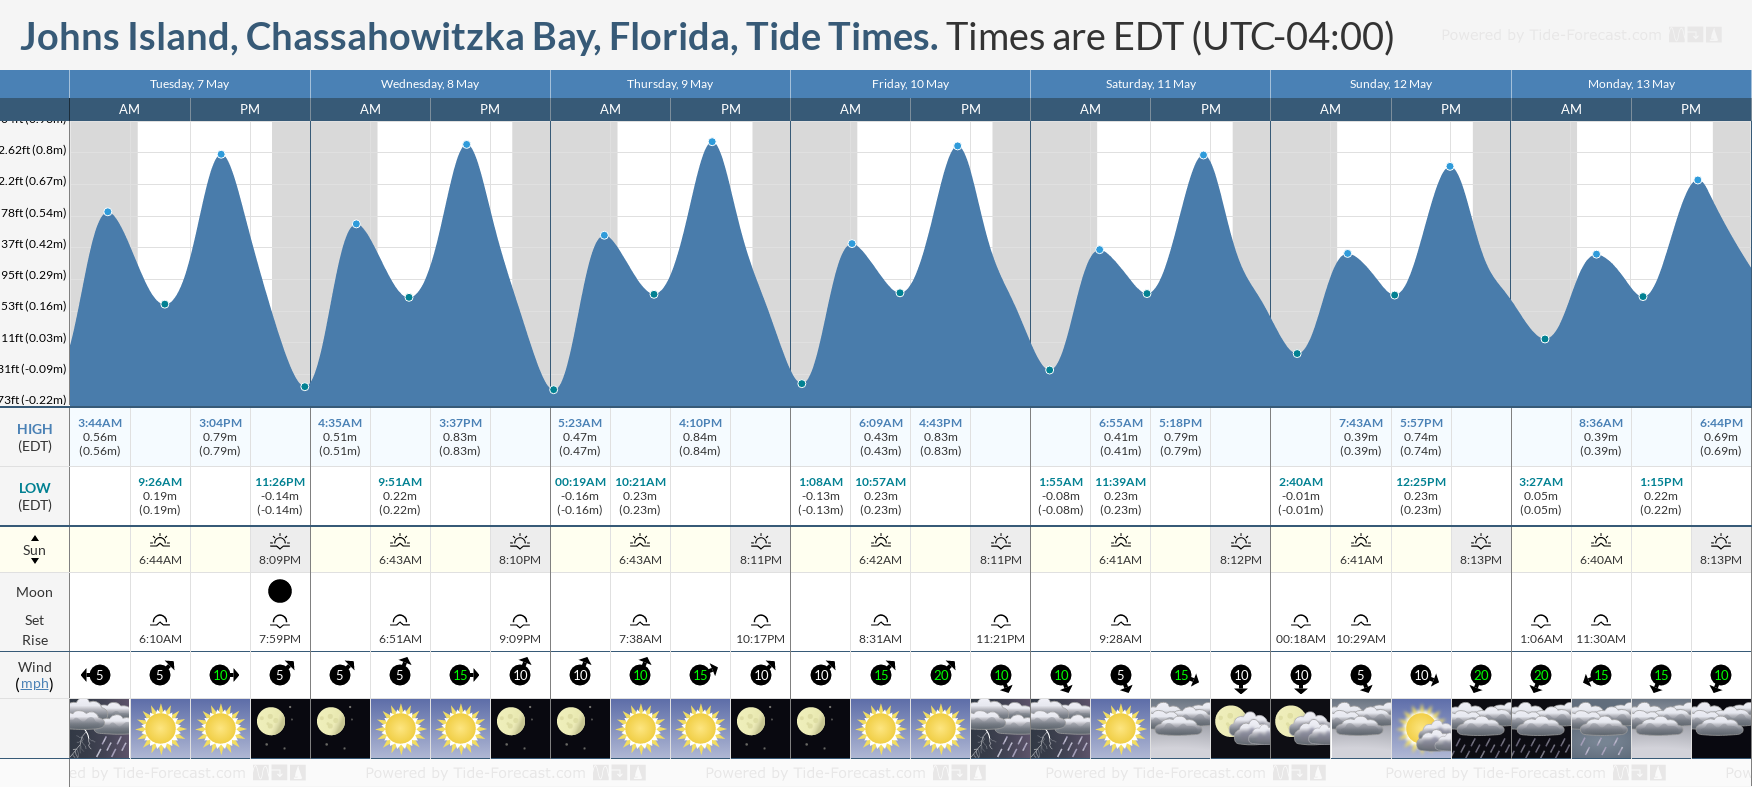 Johns Island, Chassahowitzka Bay, Florida Tide Chart including high and low tide times for the next 7 days